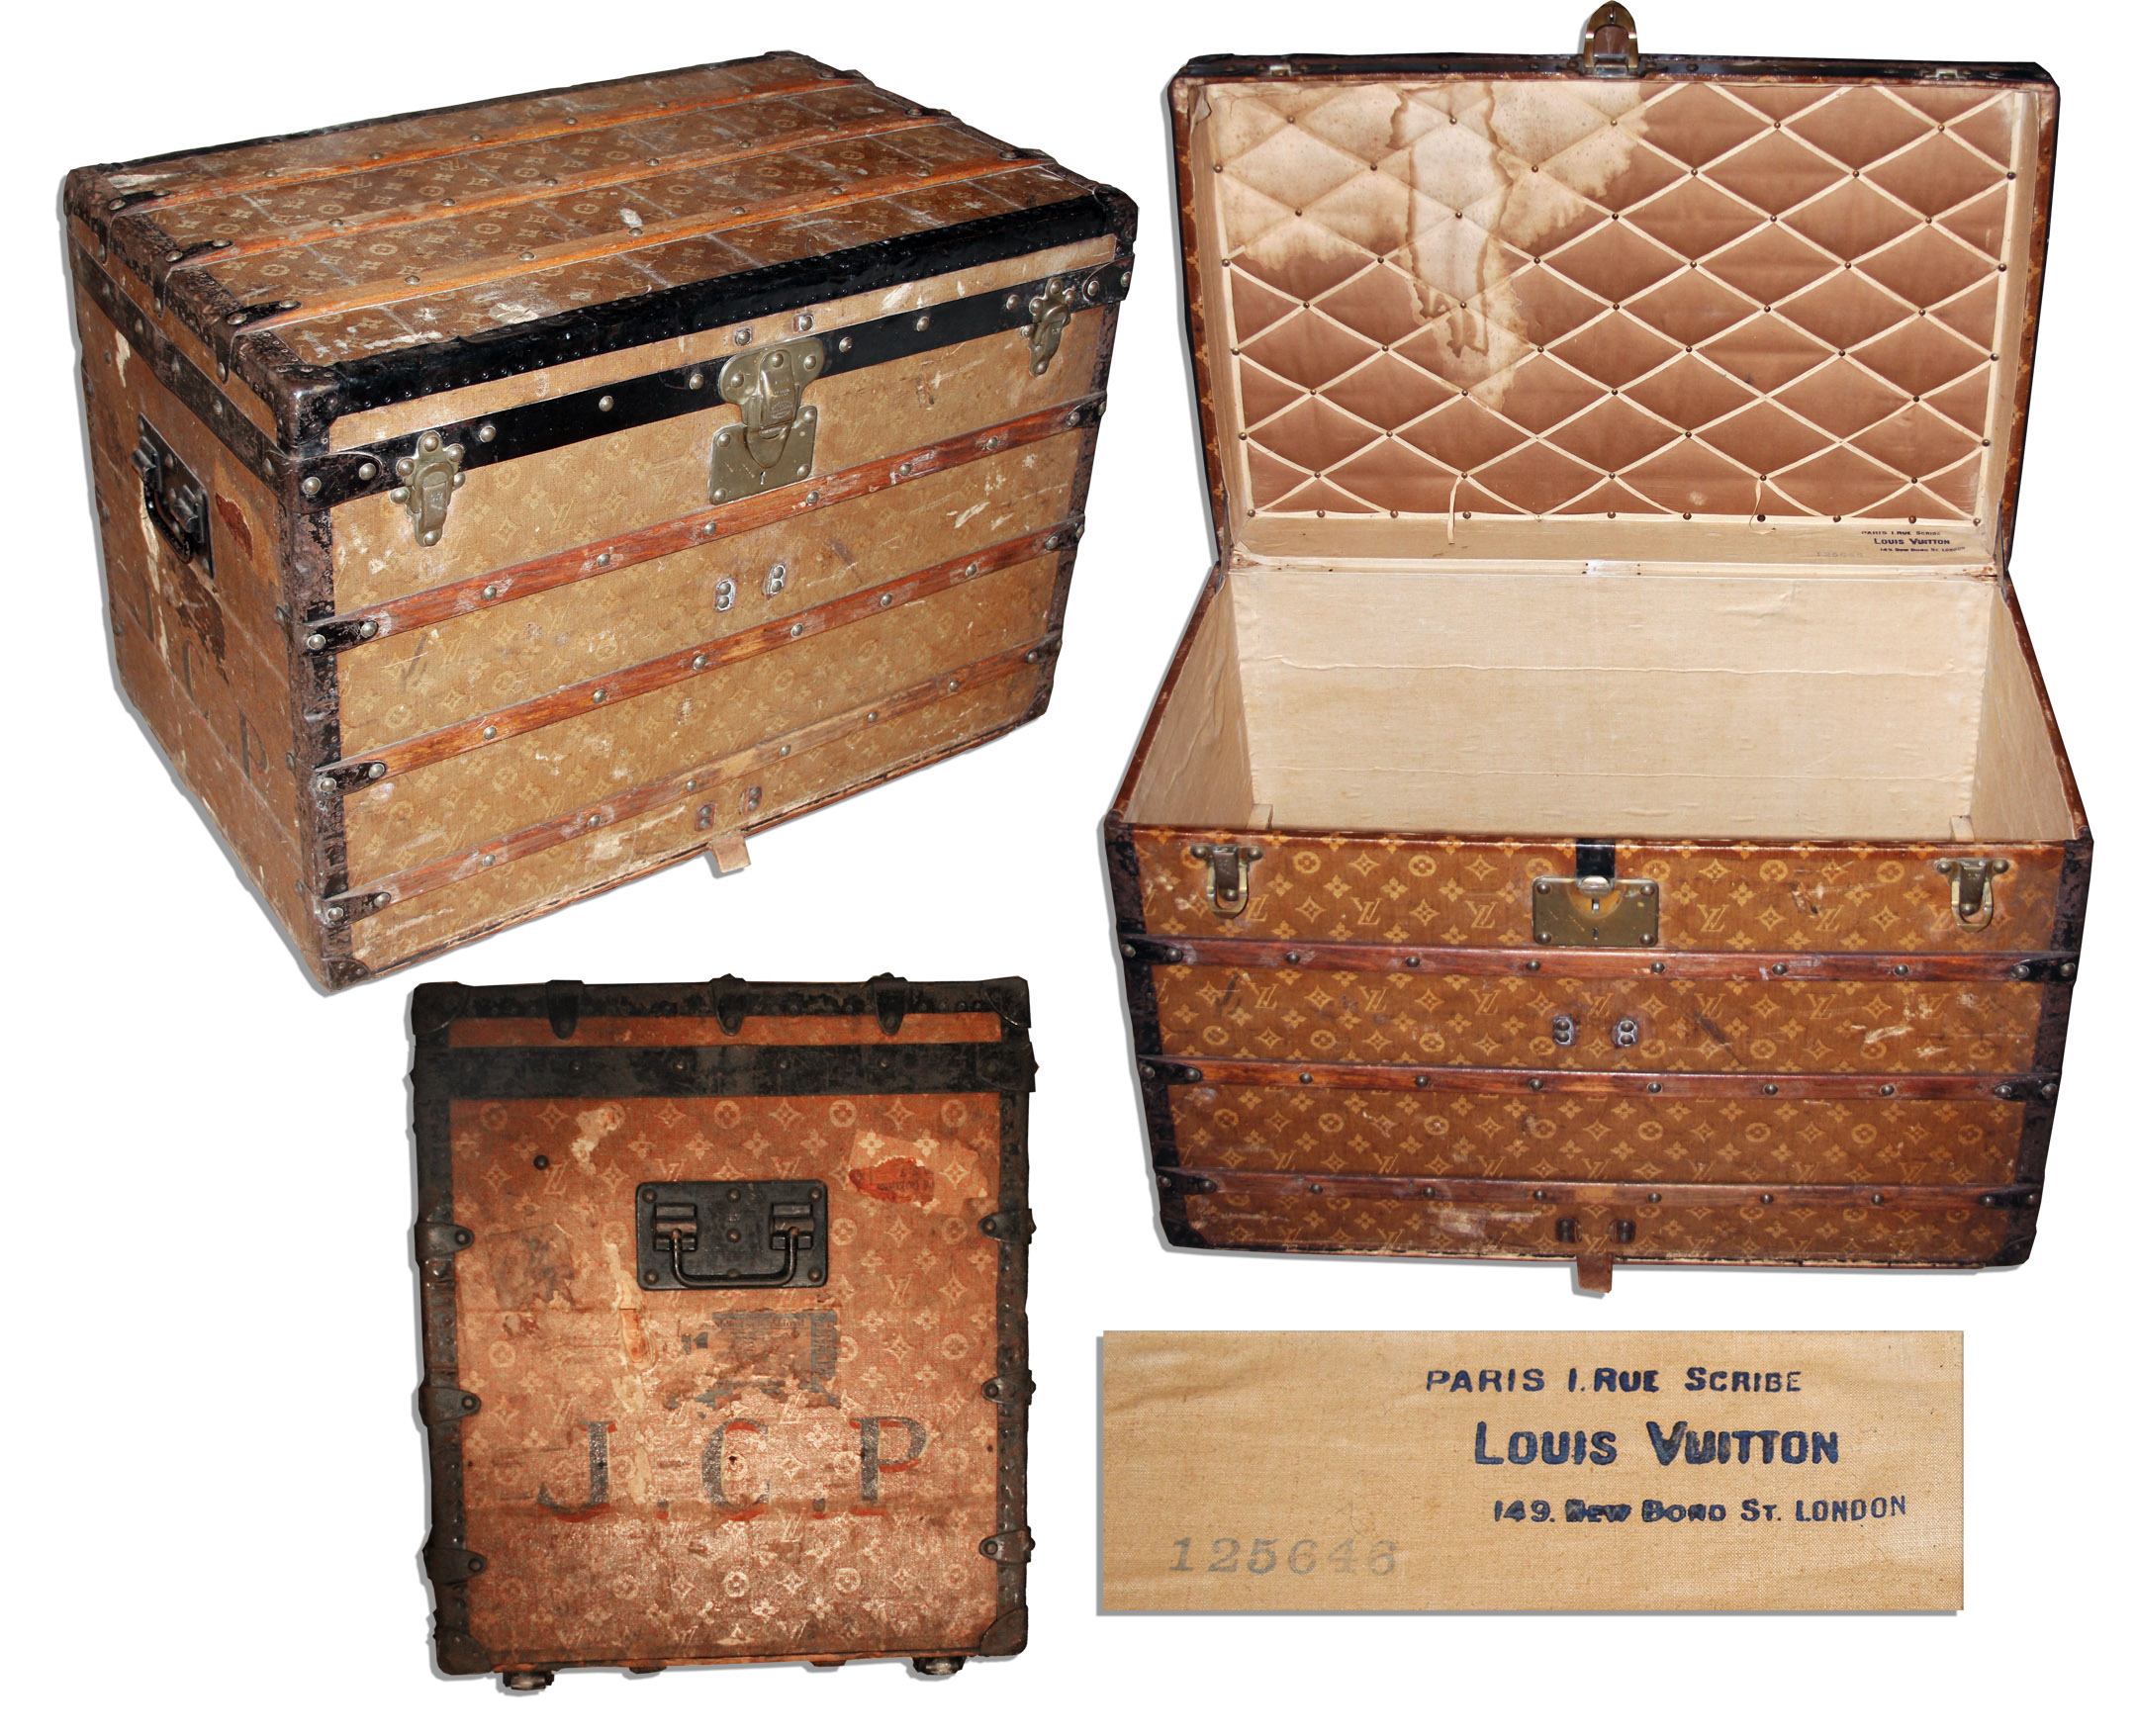 Sell Your Original Louis Vuitton Steamer Trunk at Nate D. Sanders Auctions